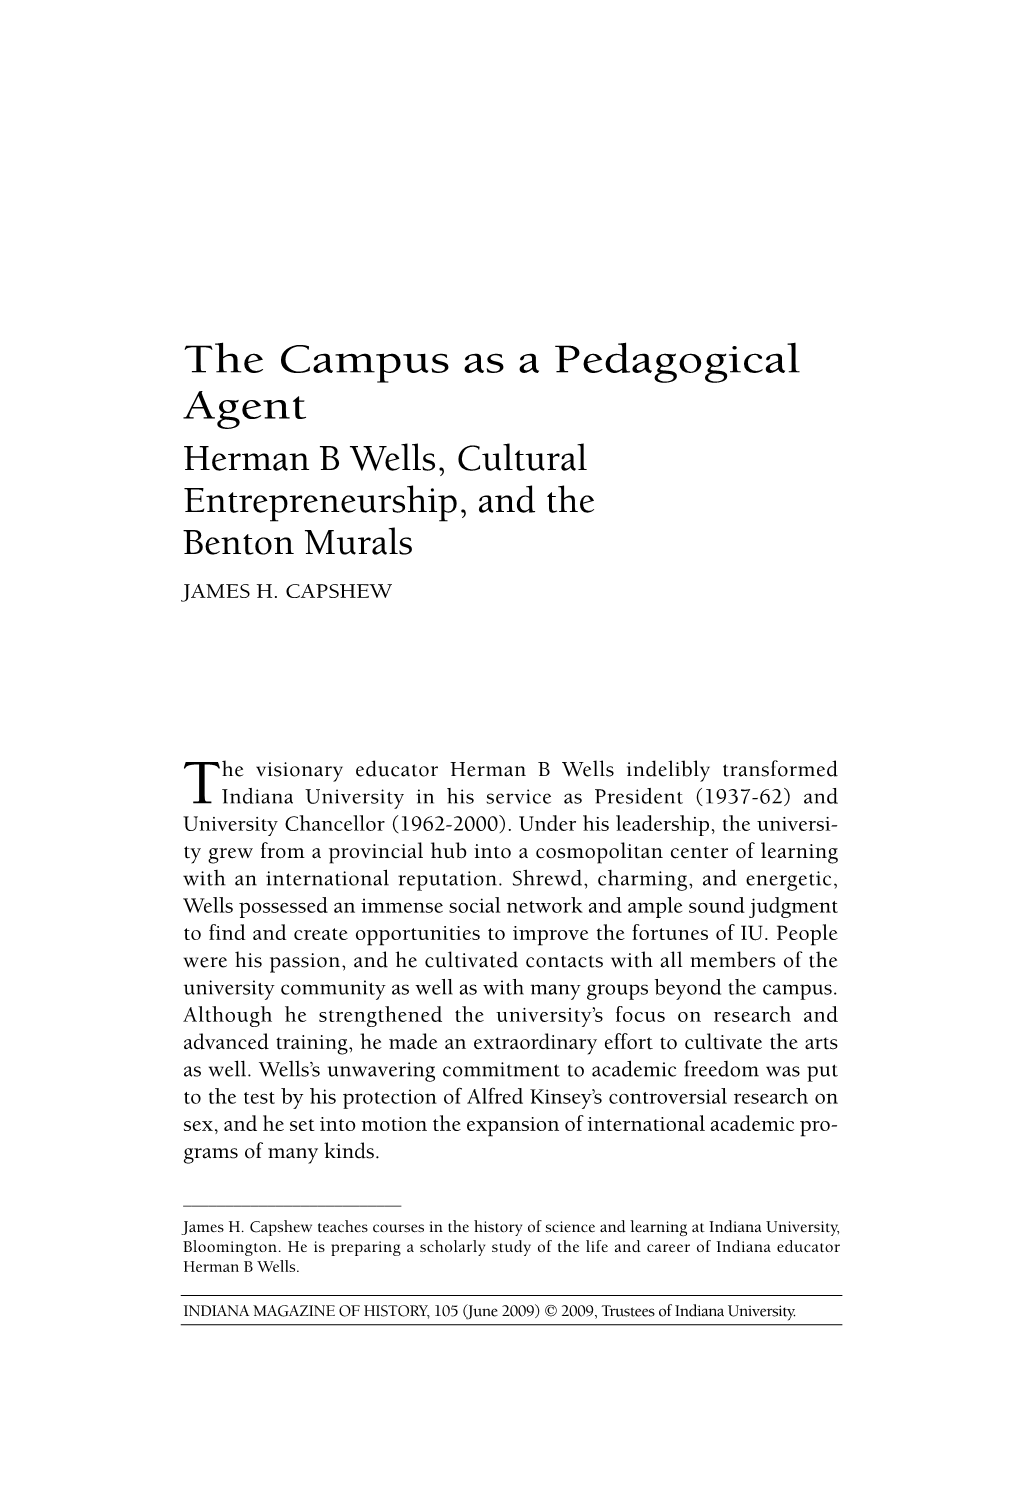 The Campus As a Pedagogical Agent Herman B Wells, Cultural Entrepreneurship, and the Benton Murals JAMES H